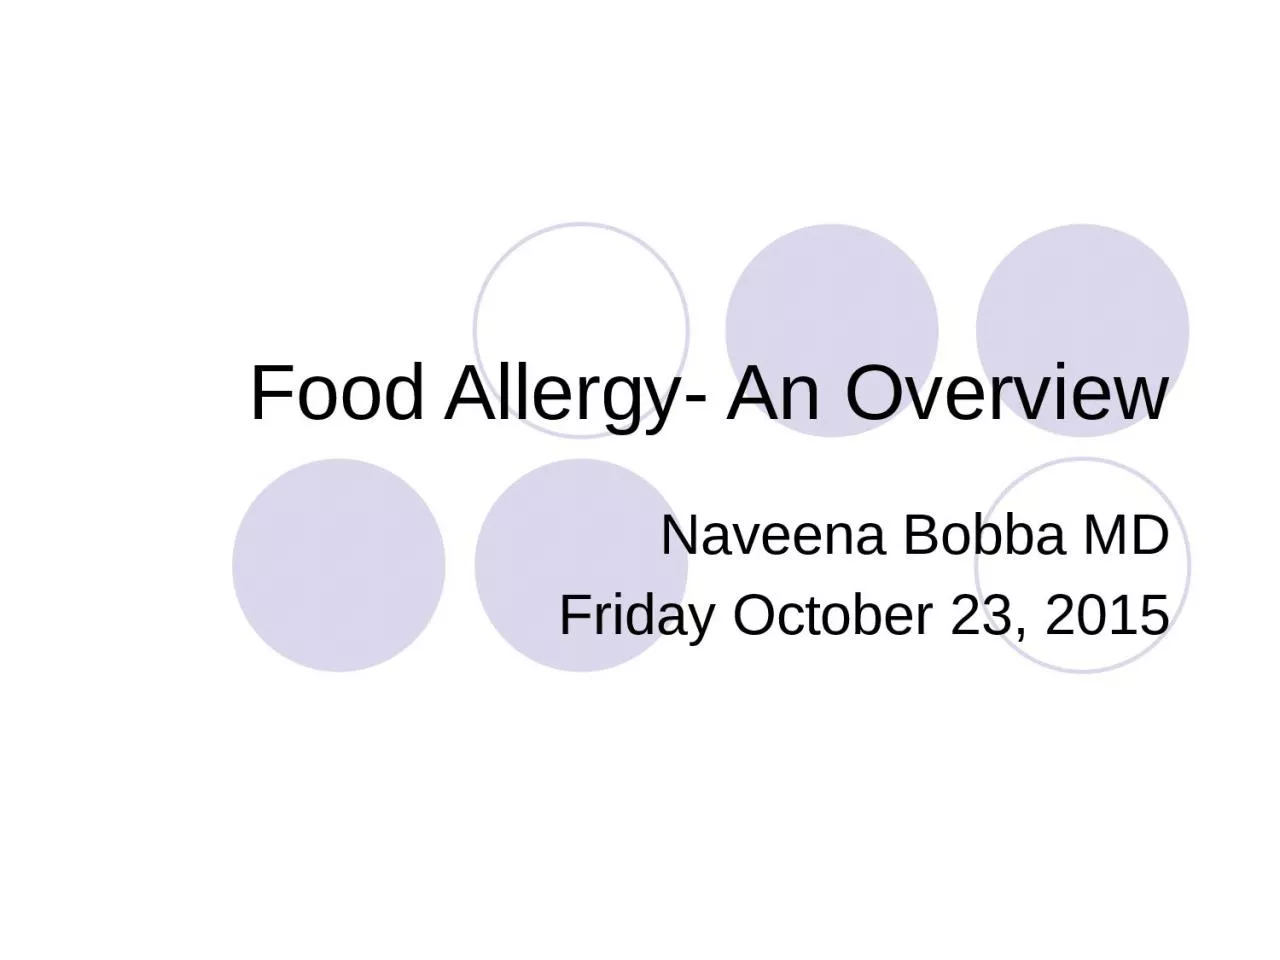 Food Allergy- An Overview